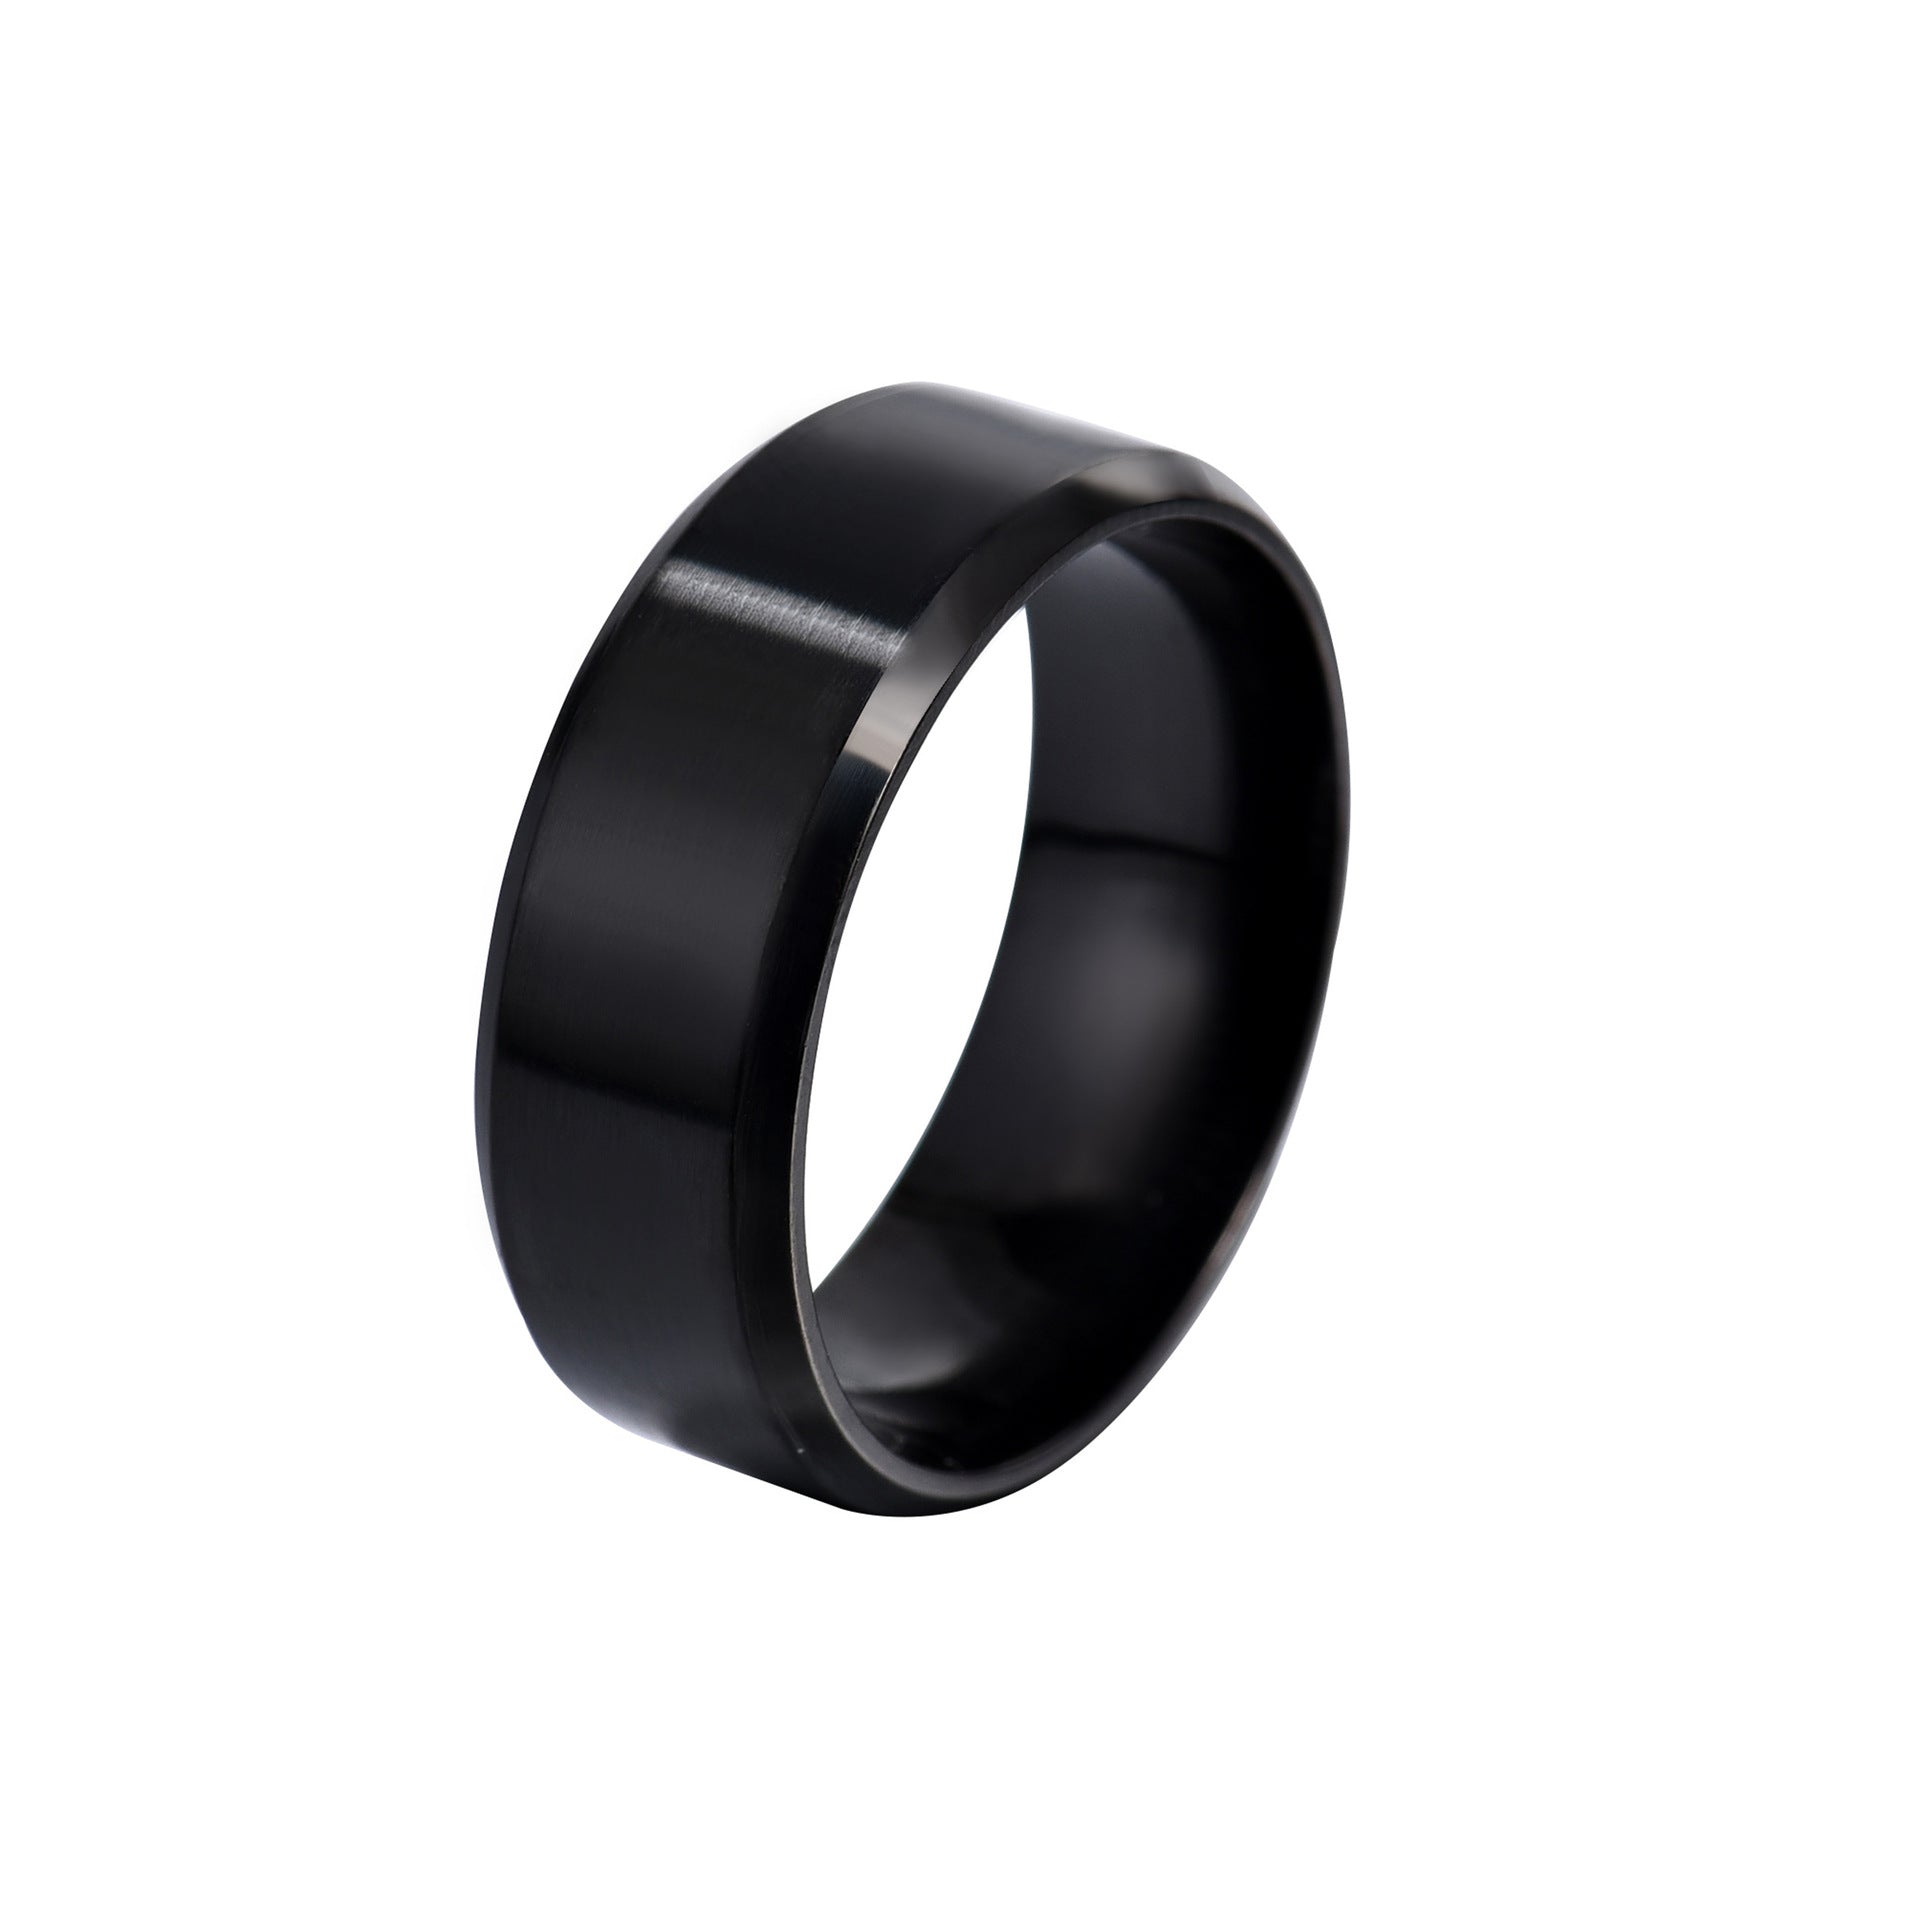 Black Color 316L Quality Steel Ring Wedding Ring (23 Size)